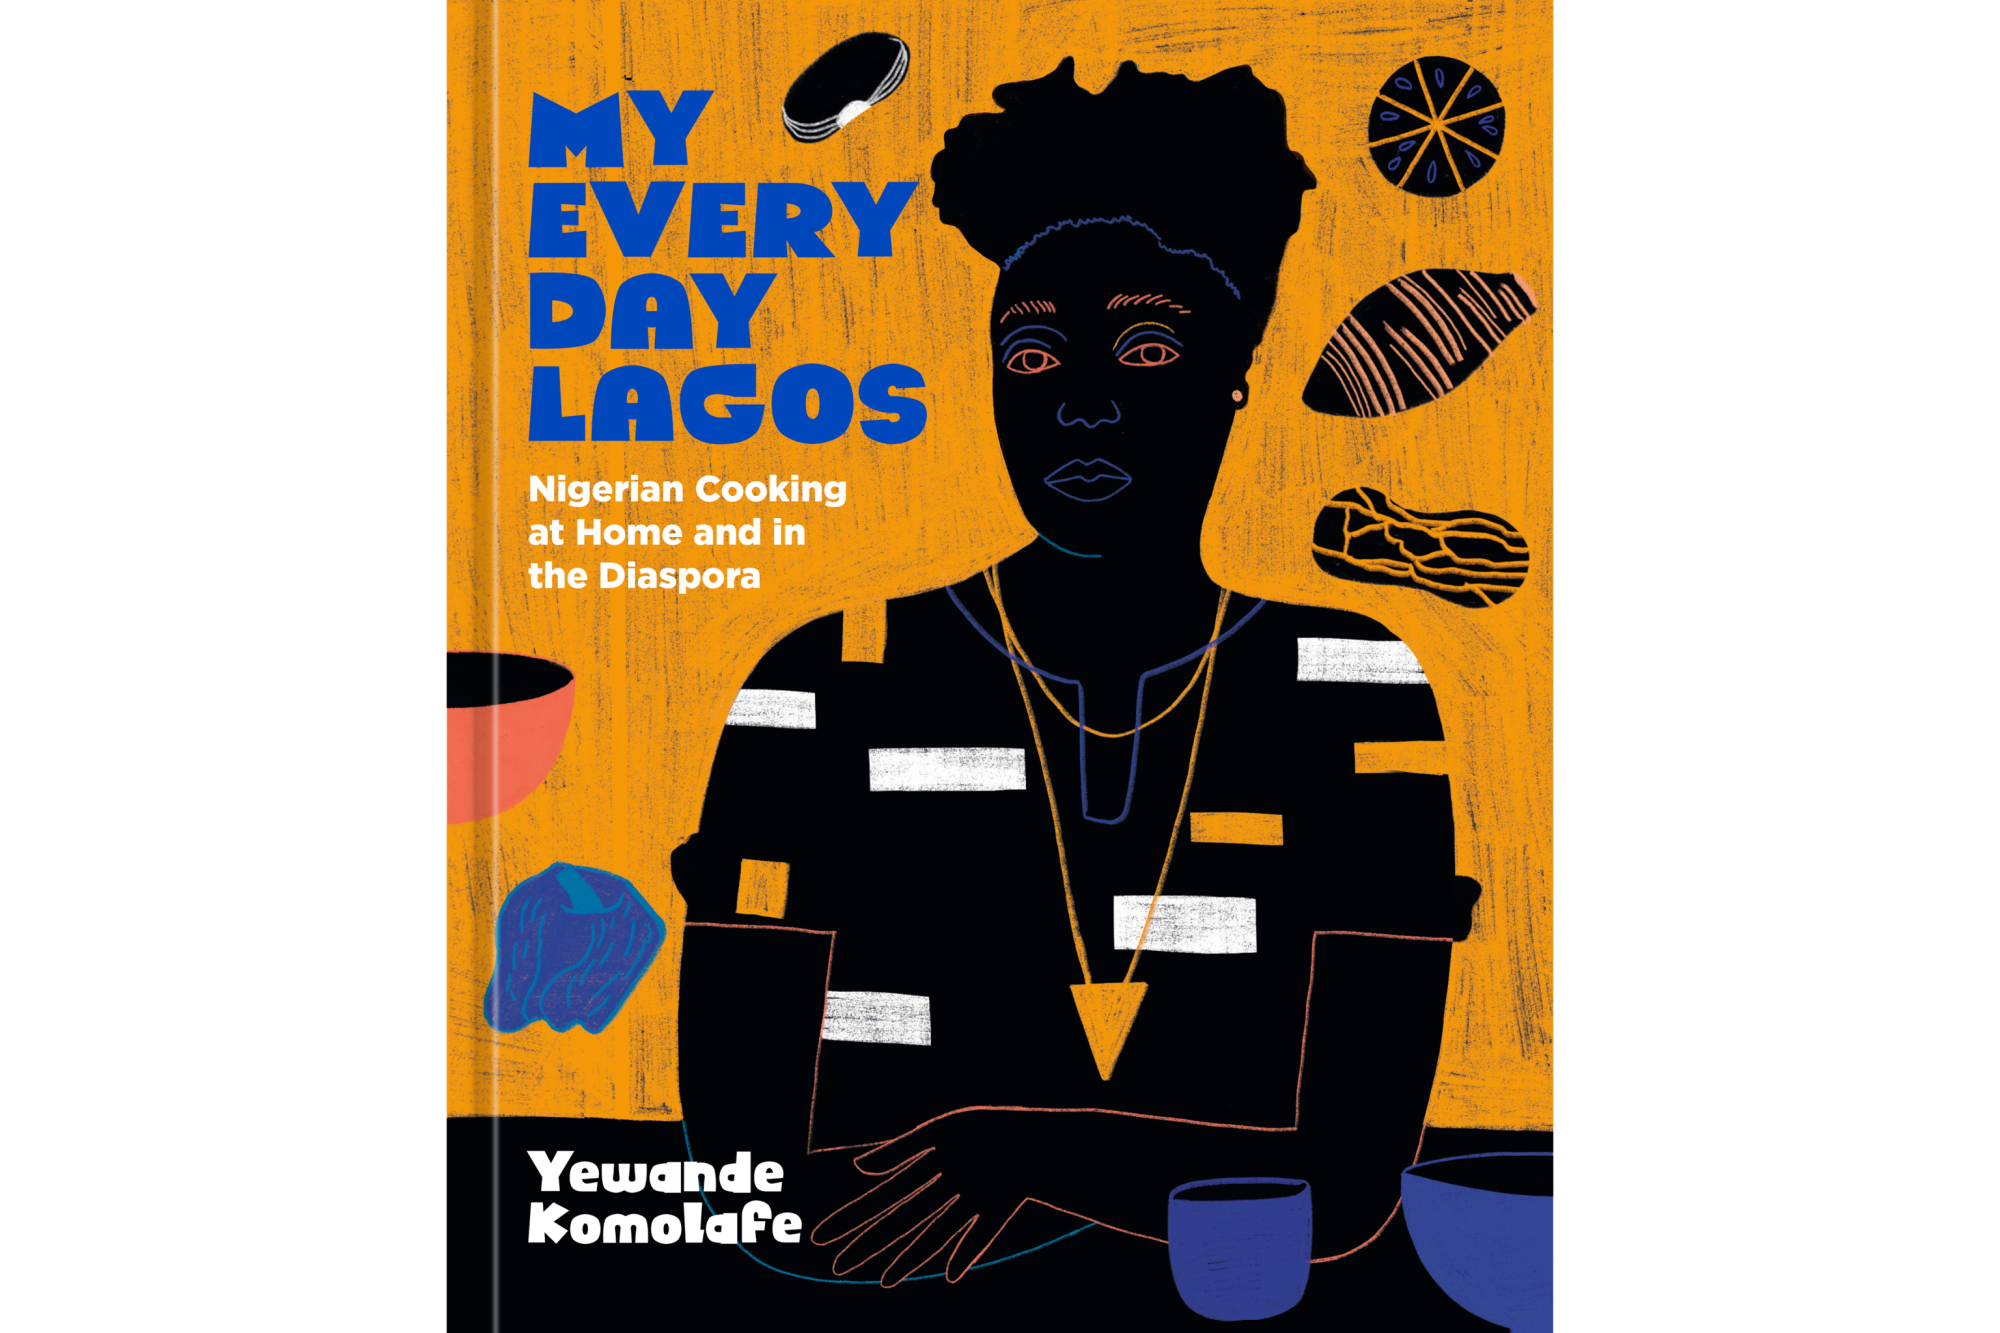 The cover of 'My Everyday Lagos' cookbook by Yewande Komolafe